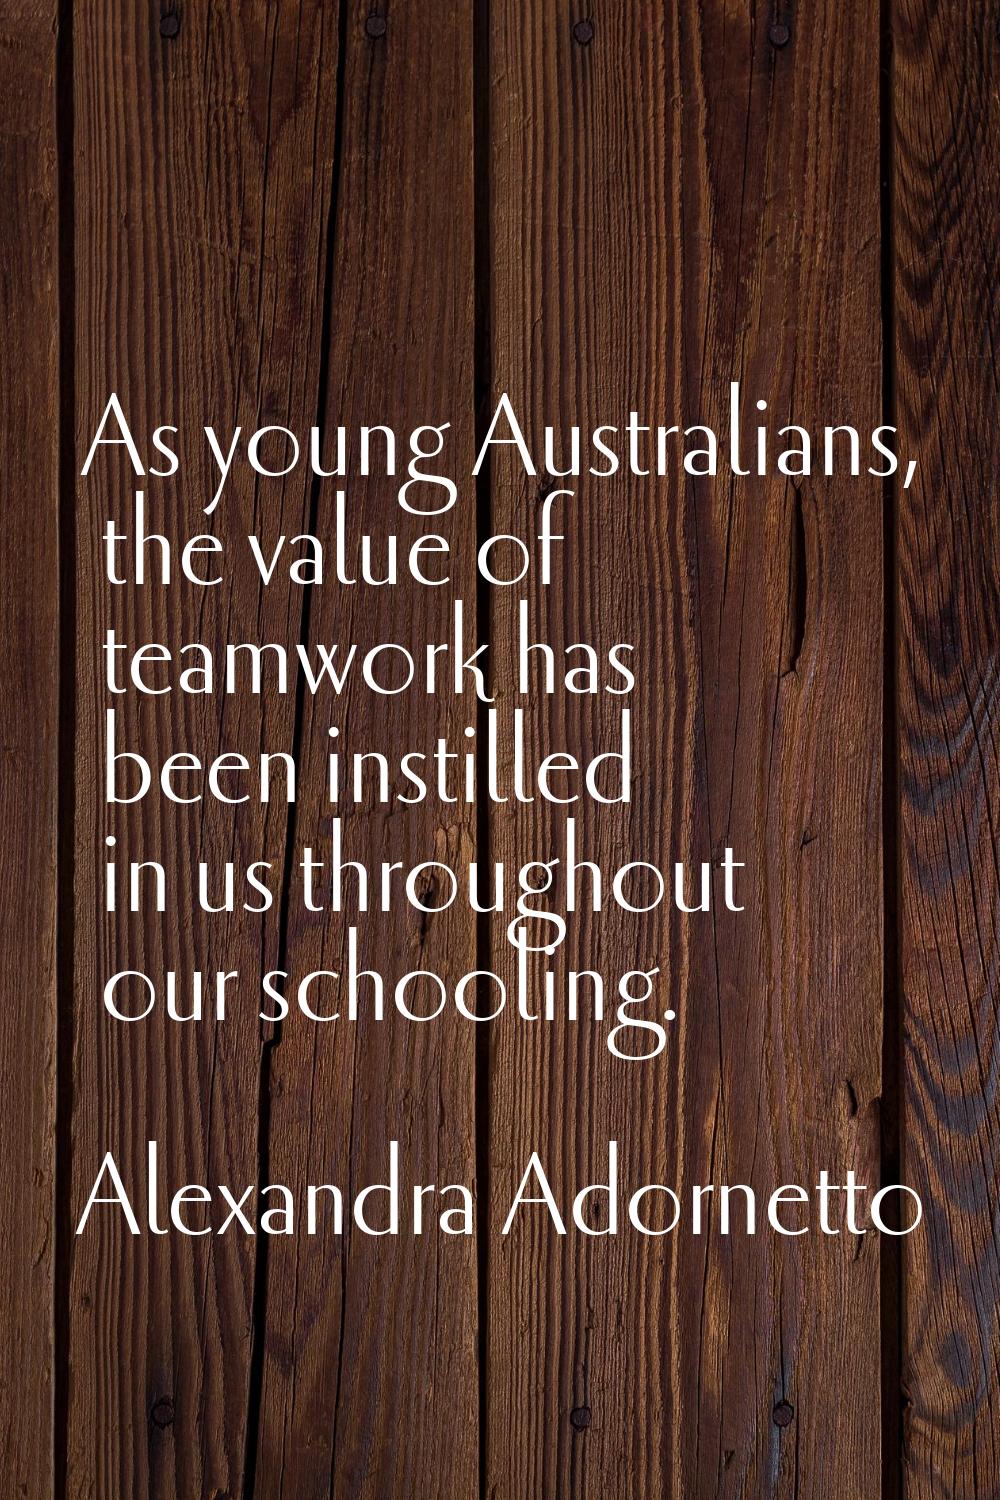 As young Australians, the value of teamwork has been instilled in us throughout our schooling.